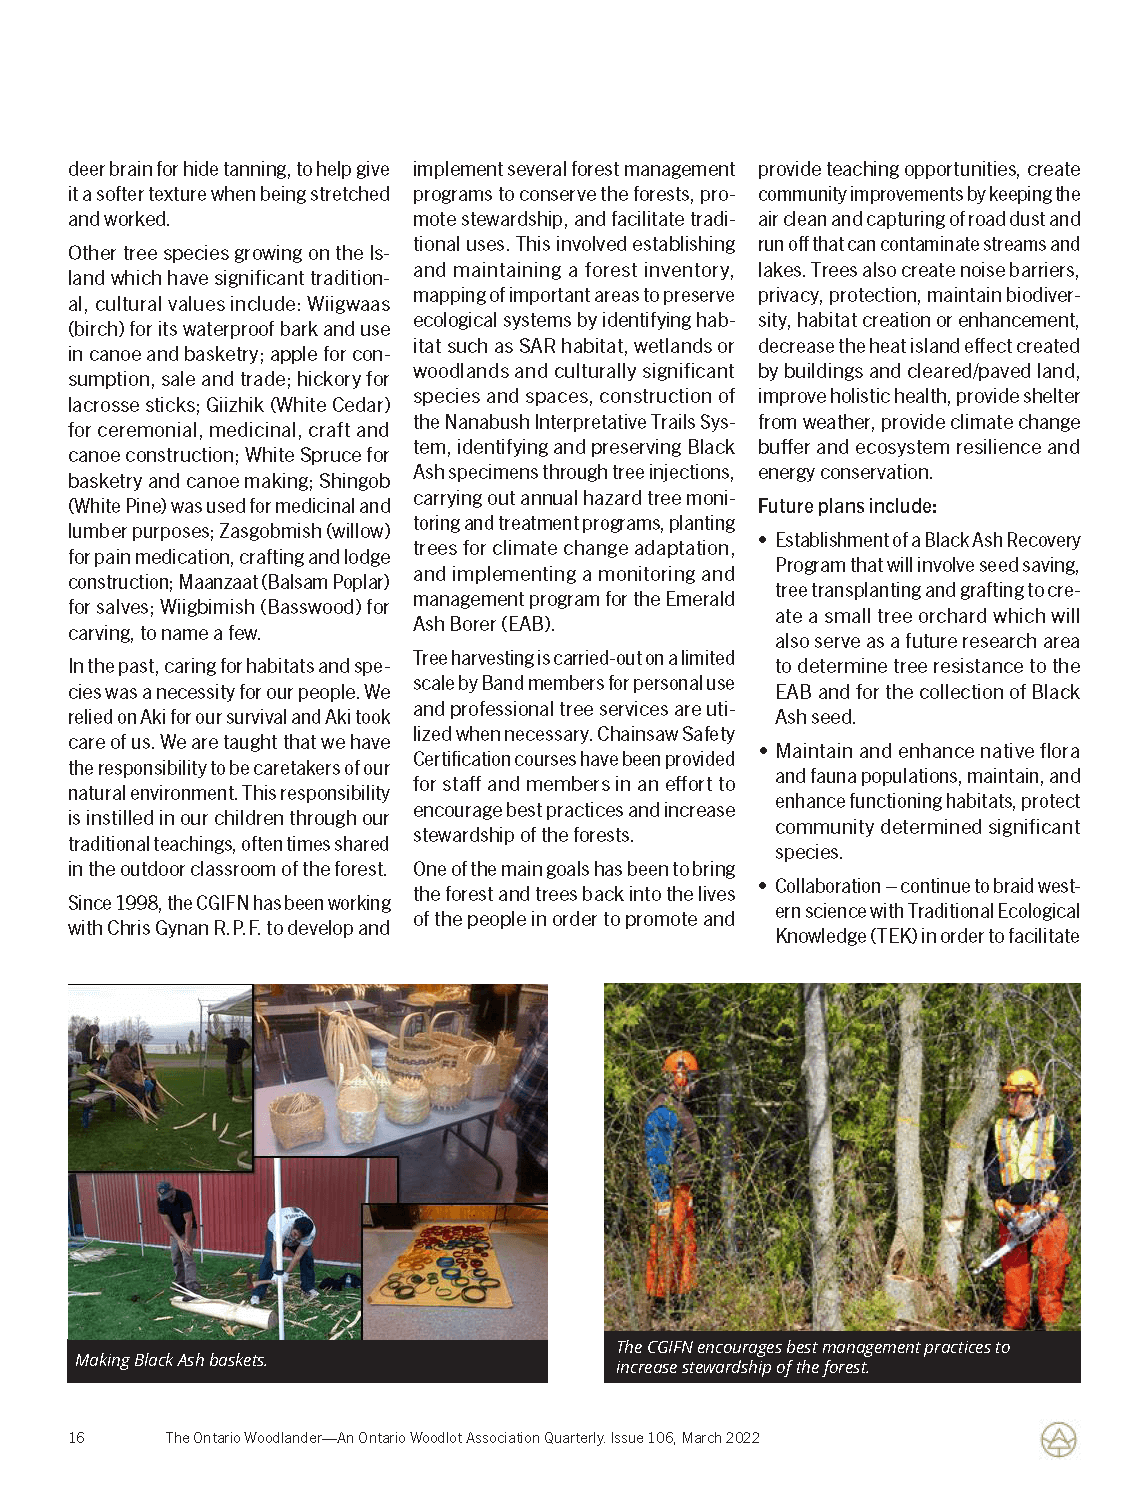 Page Ontario Woodlander Article March 2022 (2)_Page_16.png